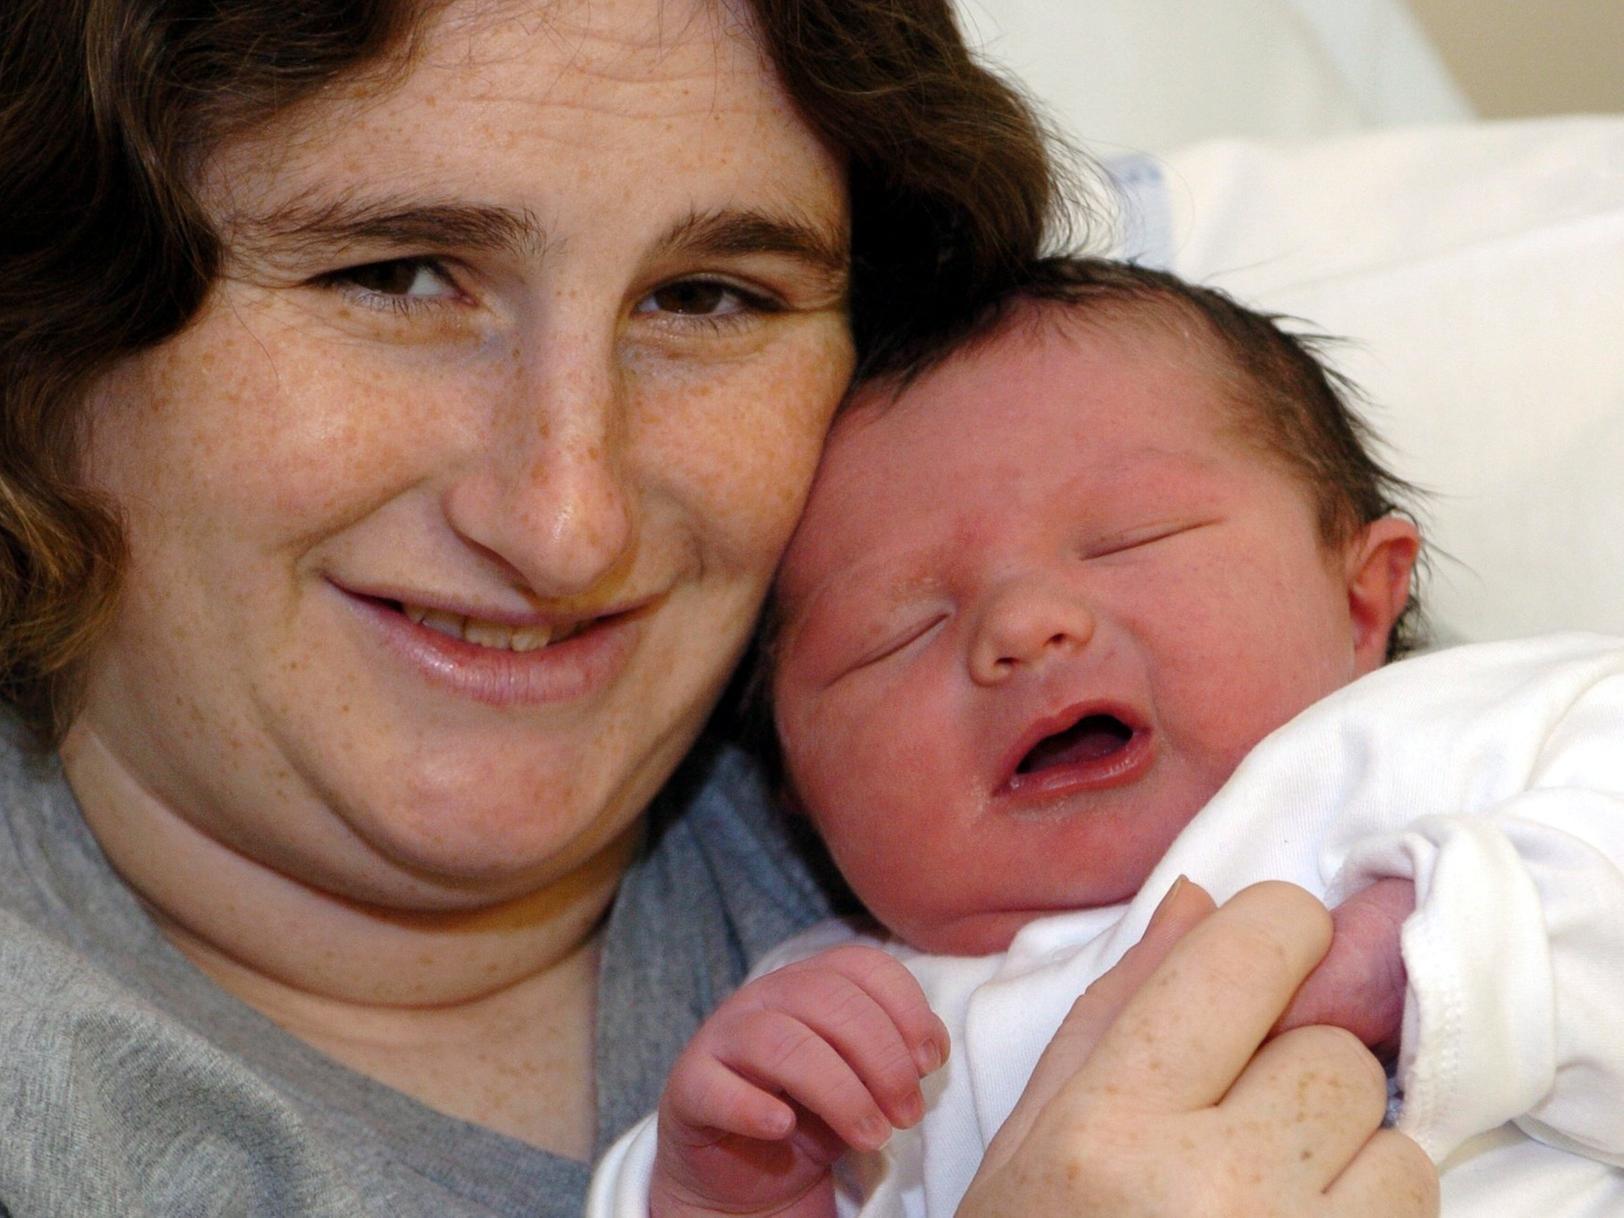 Leanne Oliver from Yeadon with her New Year baby boy born at Leeds General Infirmary.